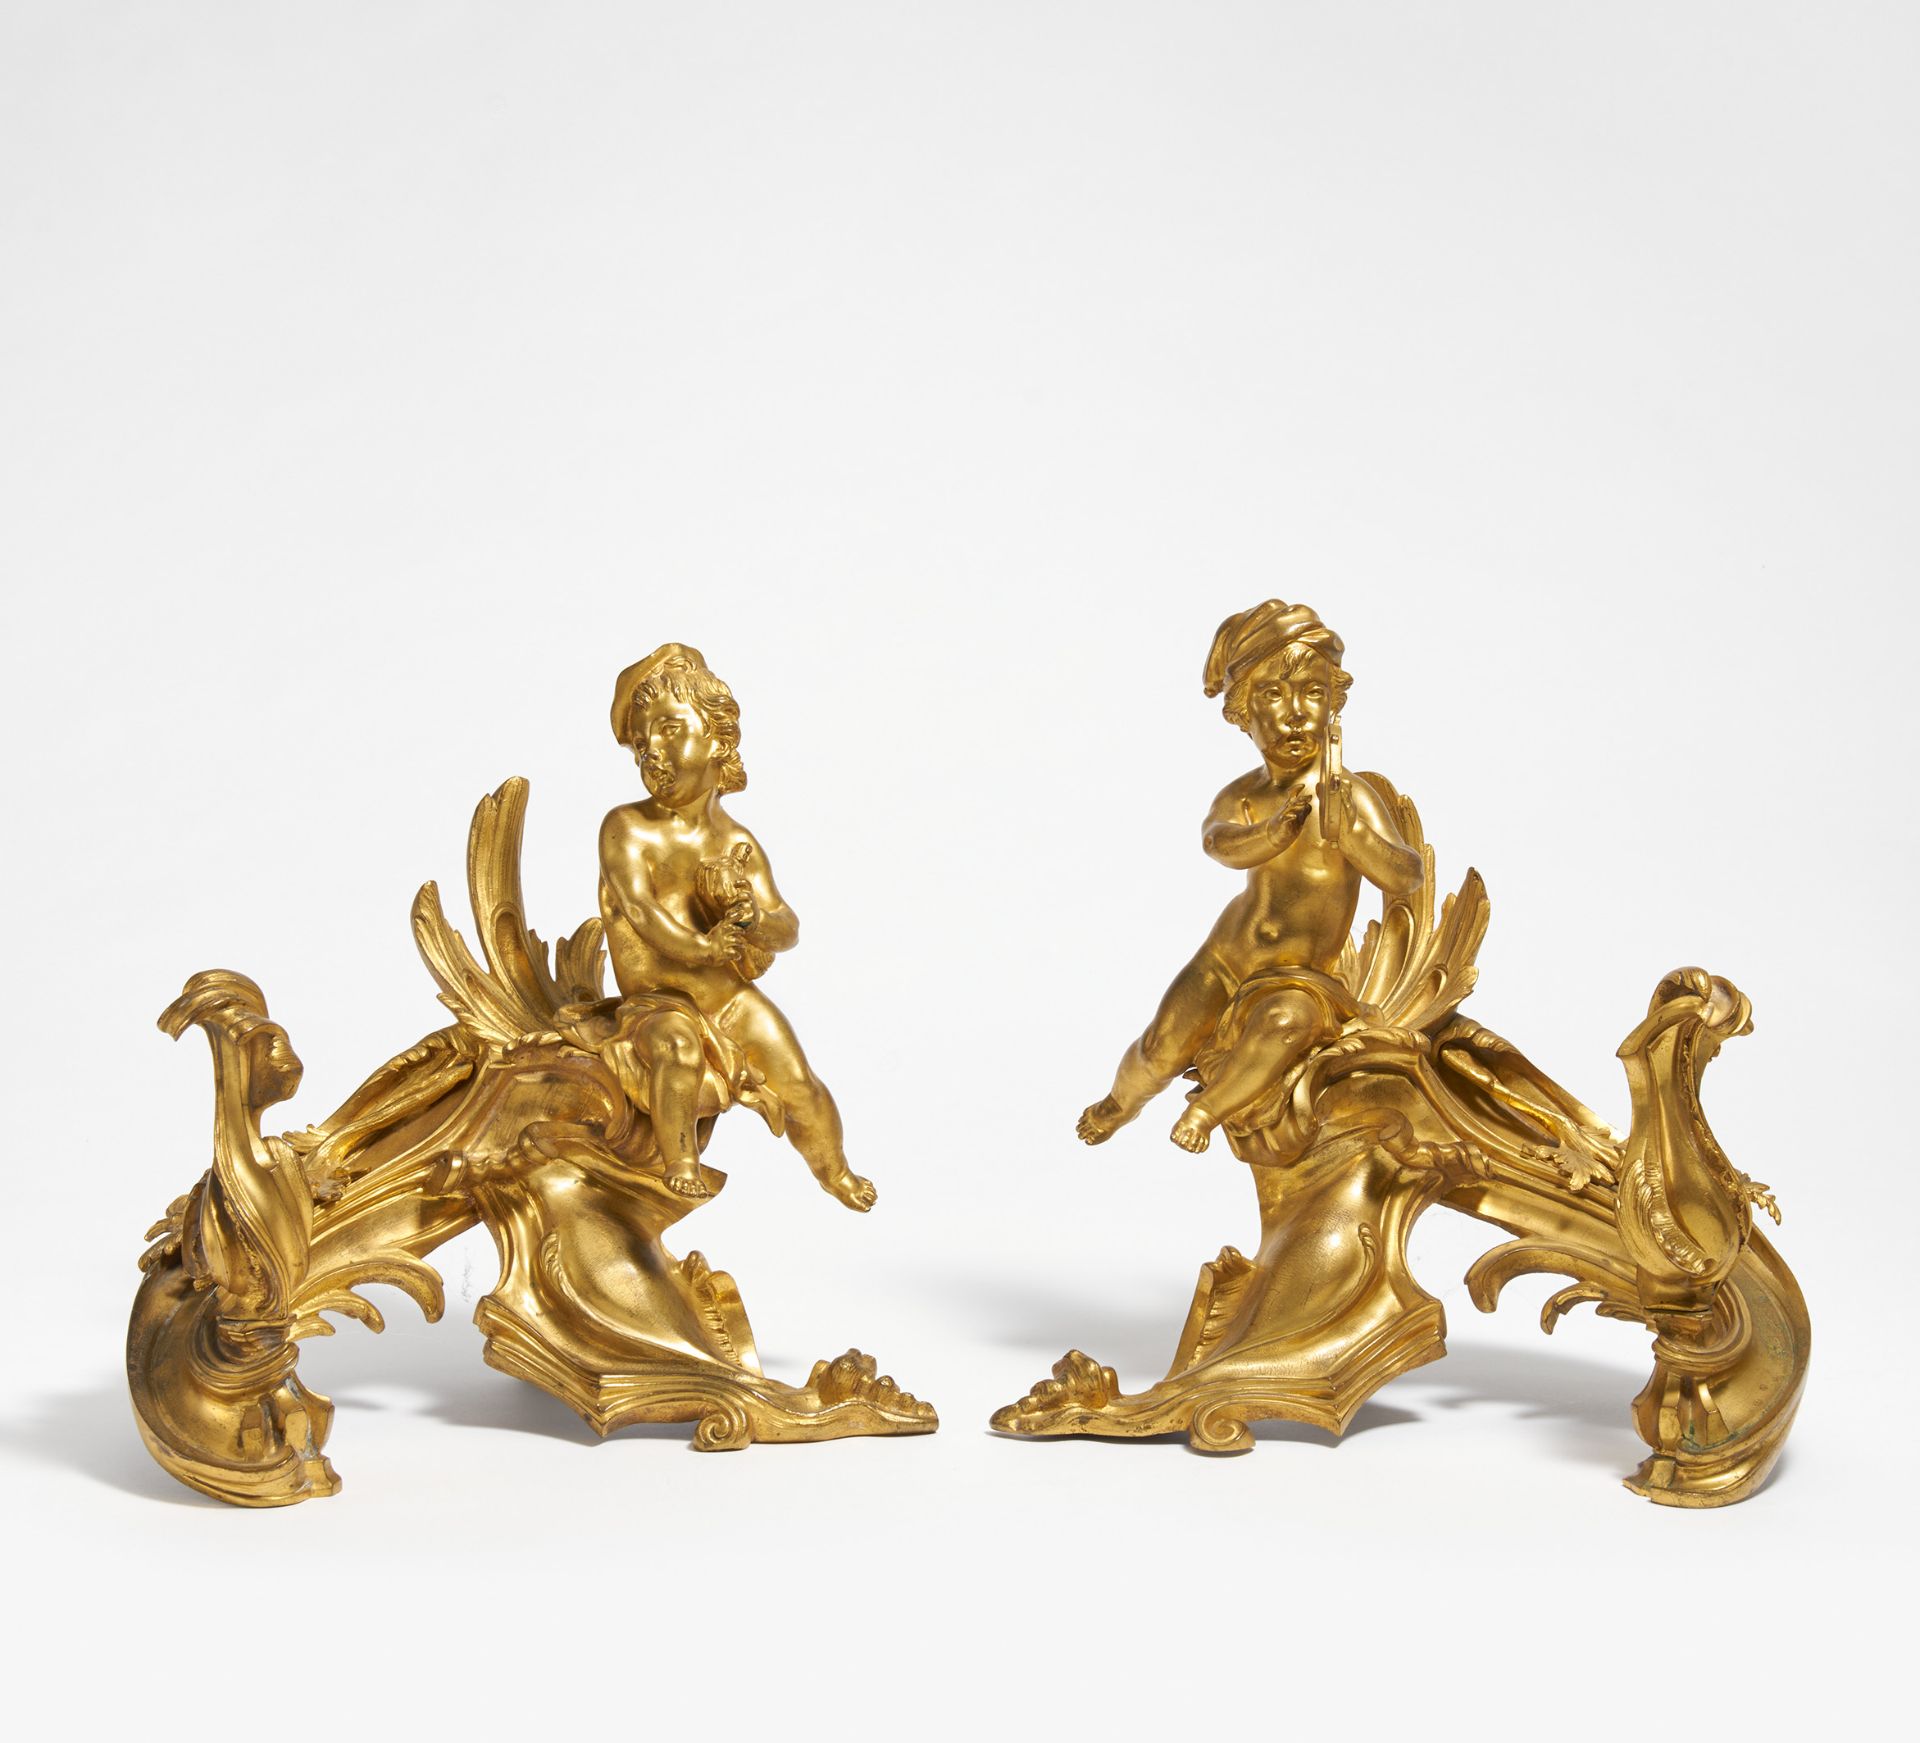 PAIR OF LARGE ANDIRONS WITH PUTTI WITH INSTRUMENTS STYLE LOUIS XV. France. Late 19th century. Gilt